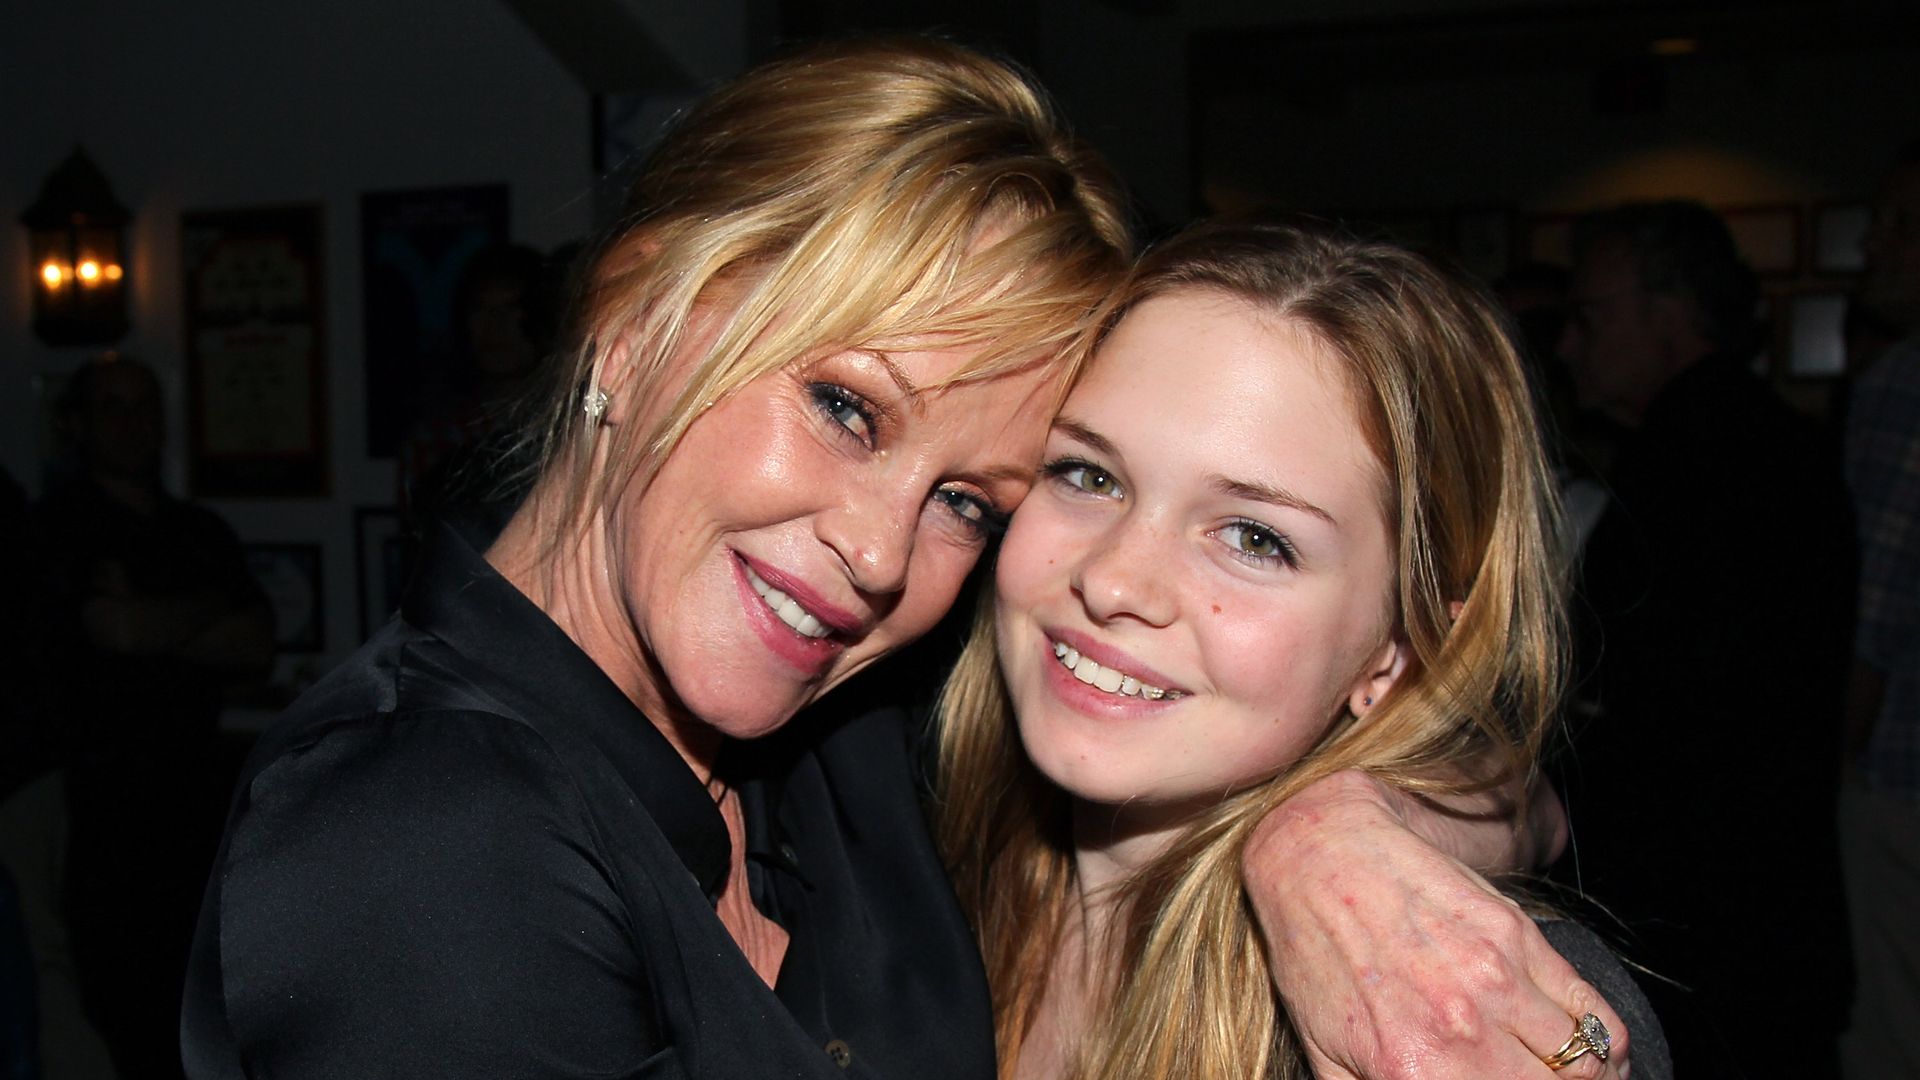 Melanie Griffith and daughter Stella Banderas pose at the opening night of "No Way Around But Through" at the Falcon Theatre on June 3, 2012 in Burbank, California